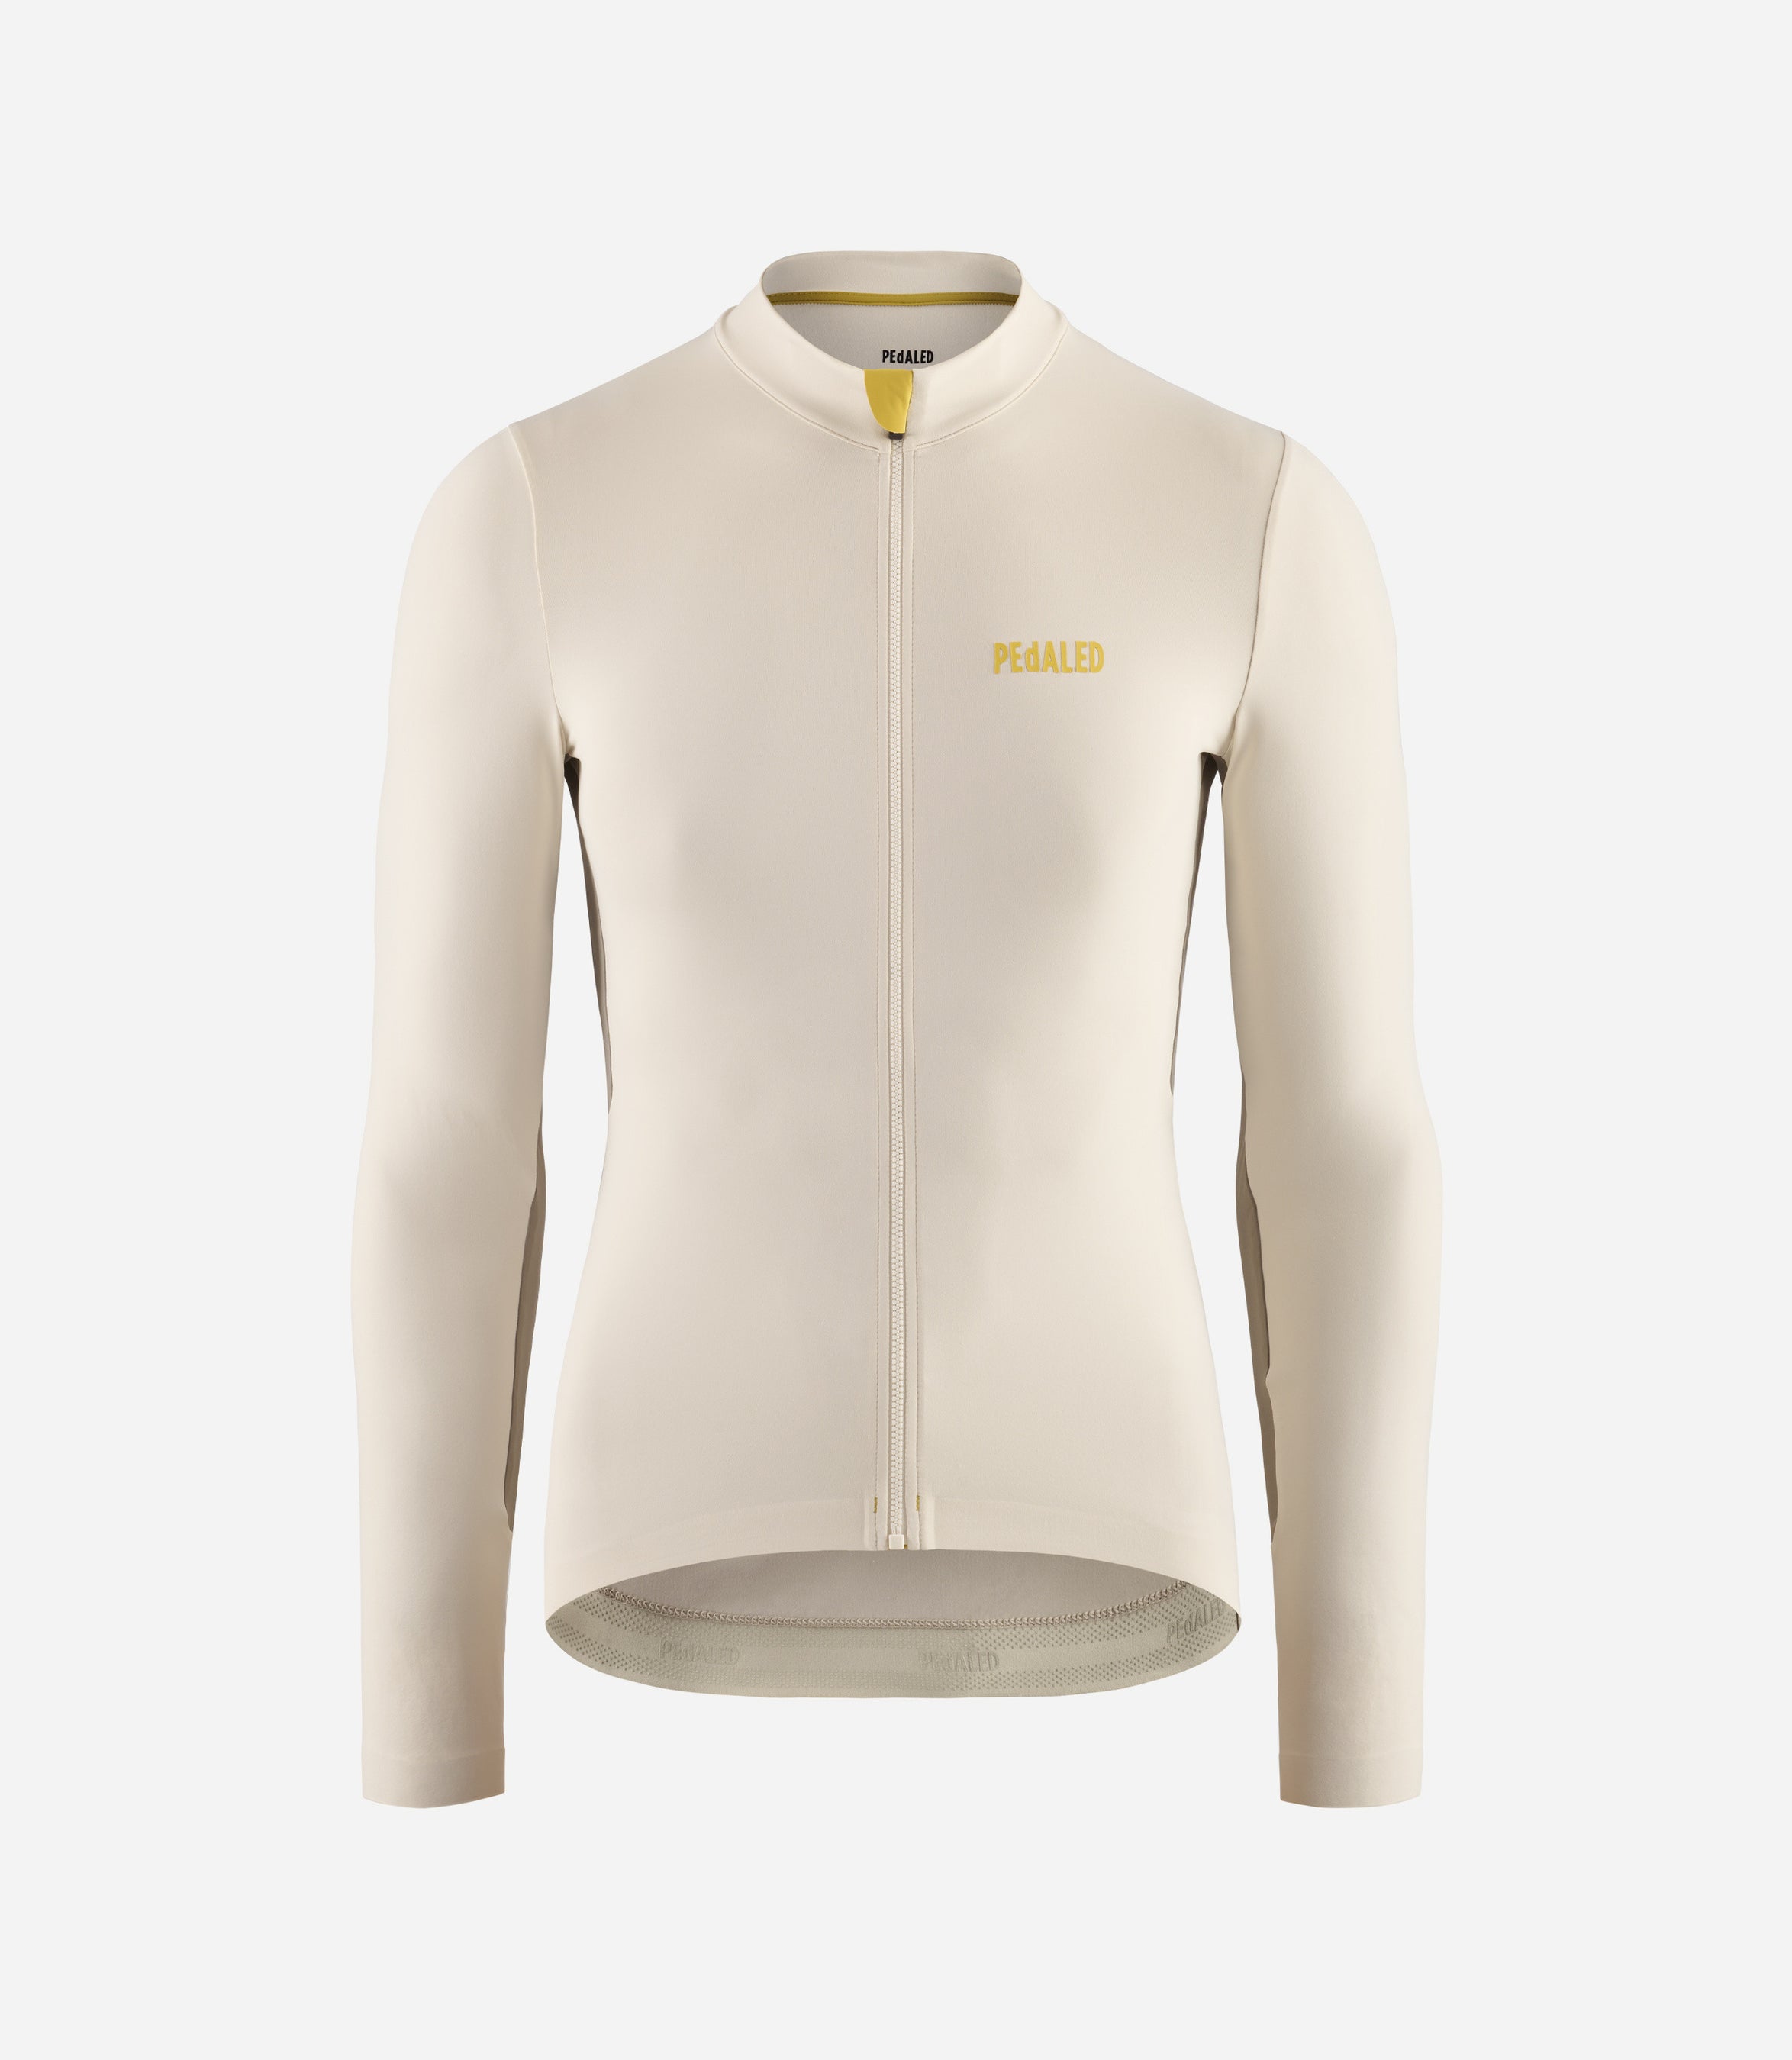 W4WJSEL0GPE_1_women cycling long sleeve jersey off white element front pedaled